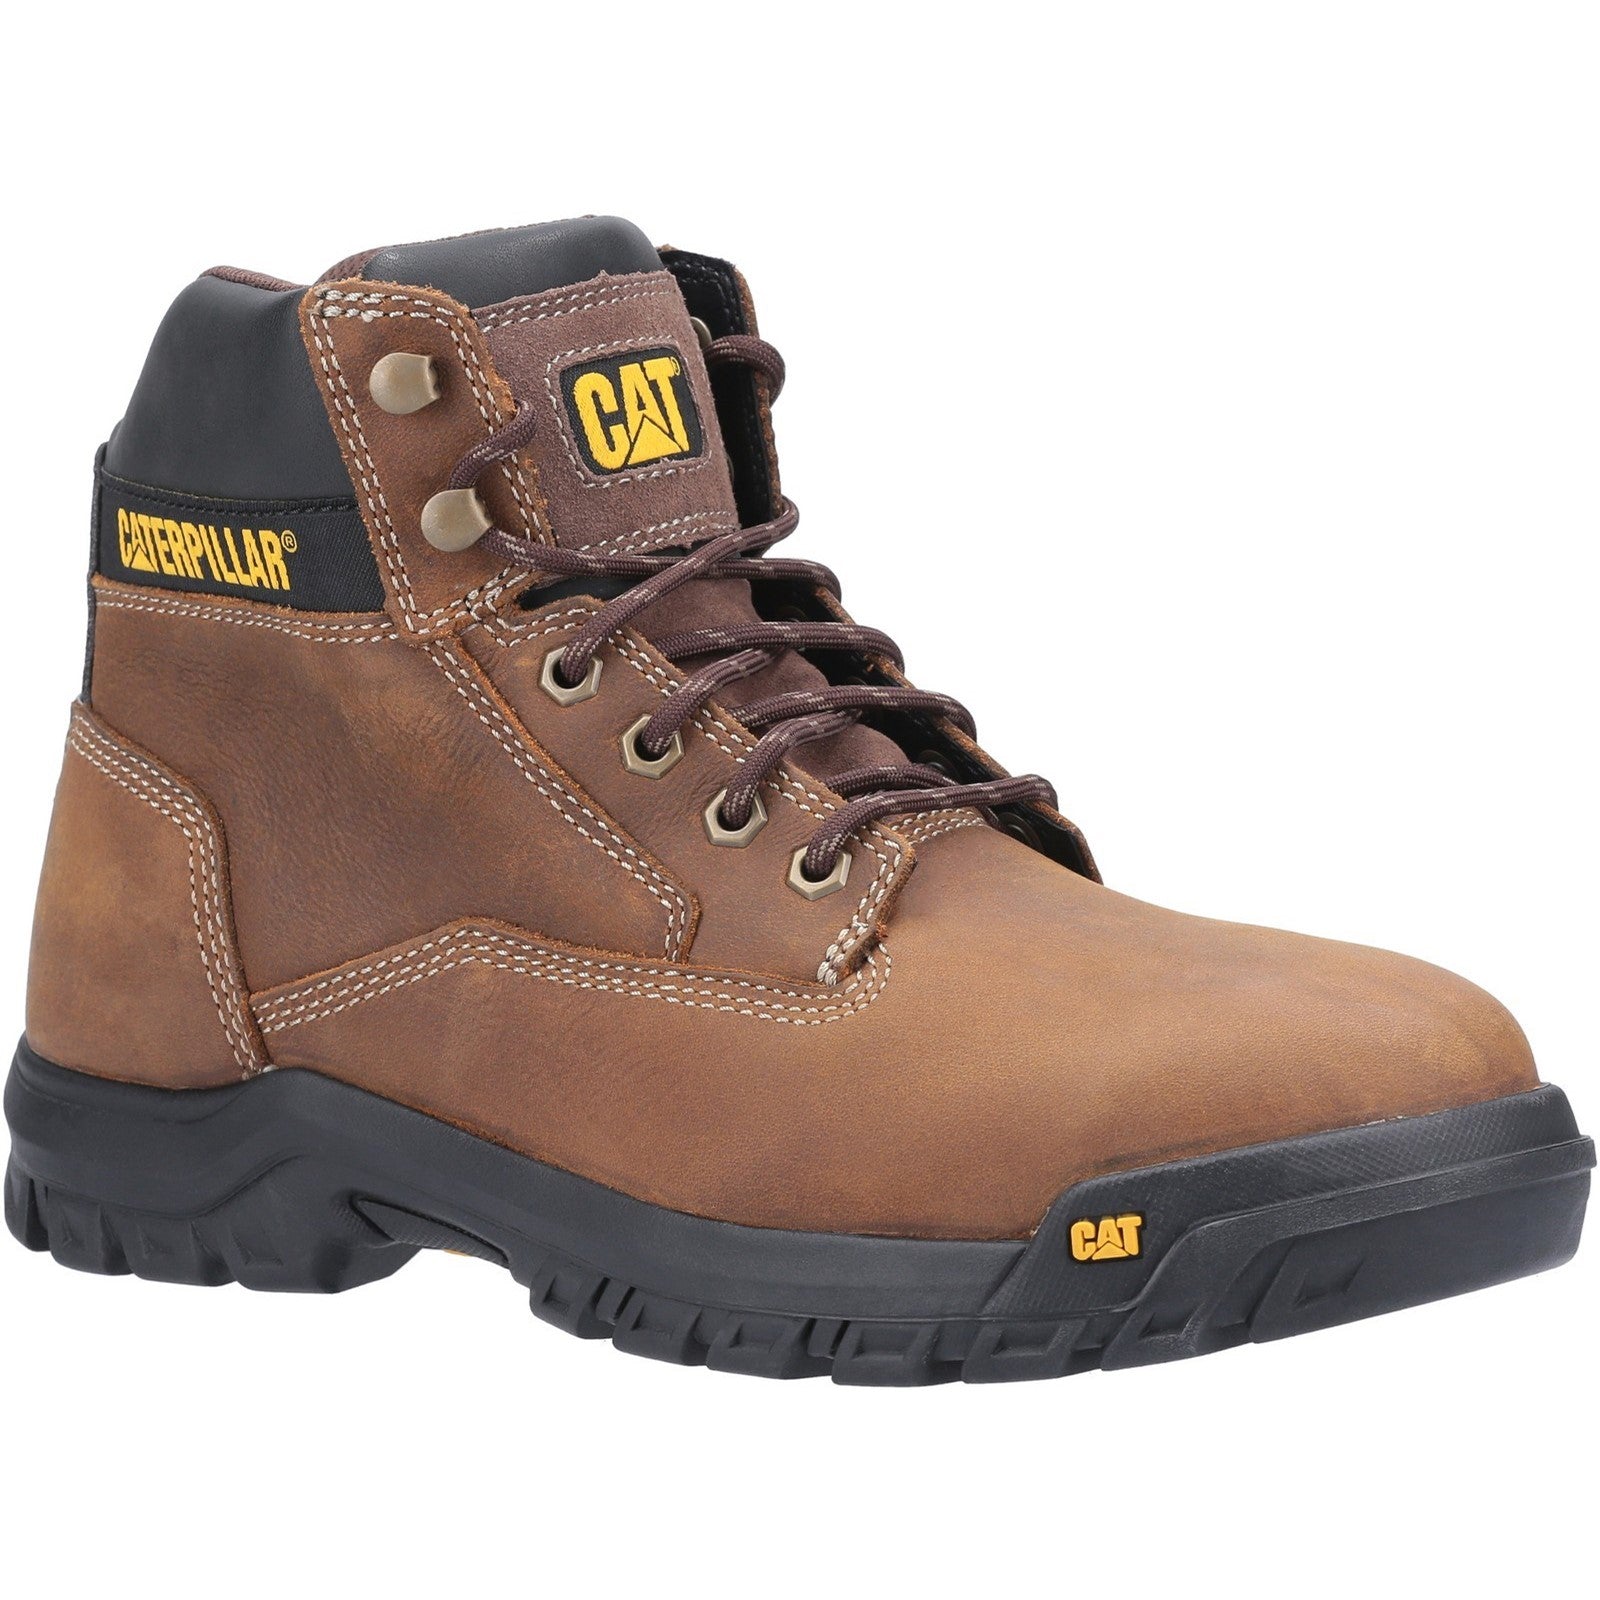 CAT Median S3 Lace Up Safety Boot